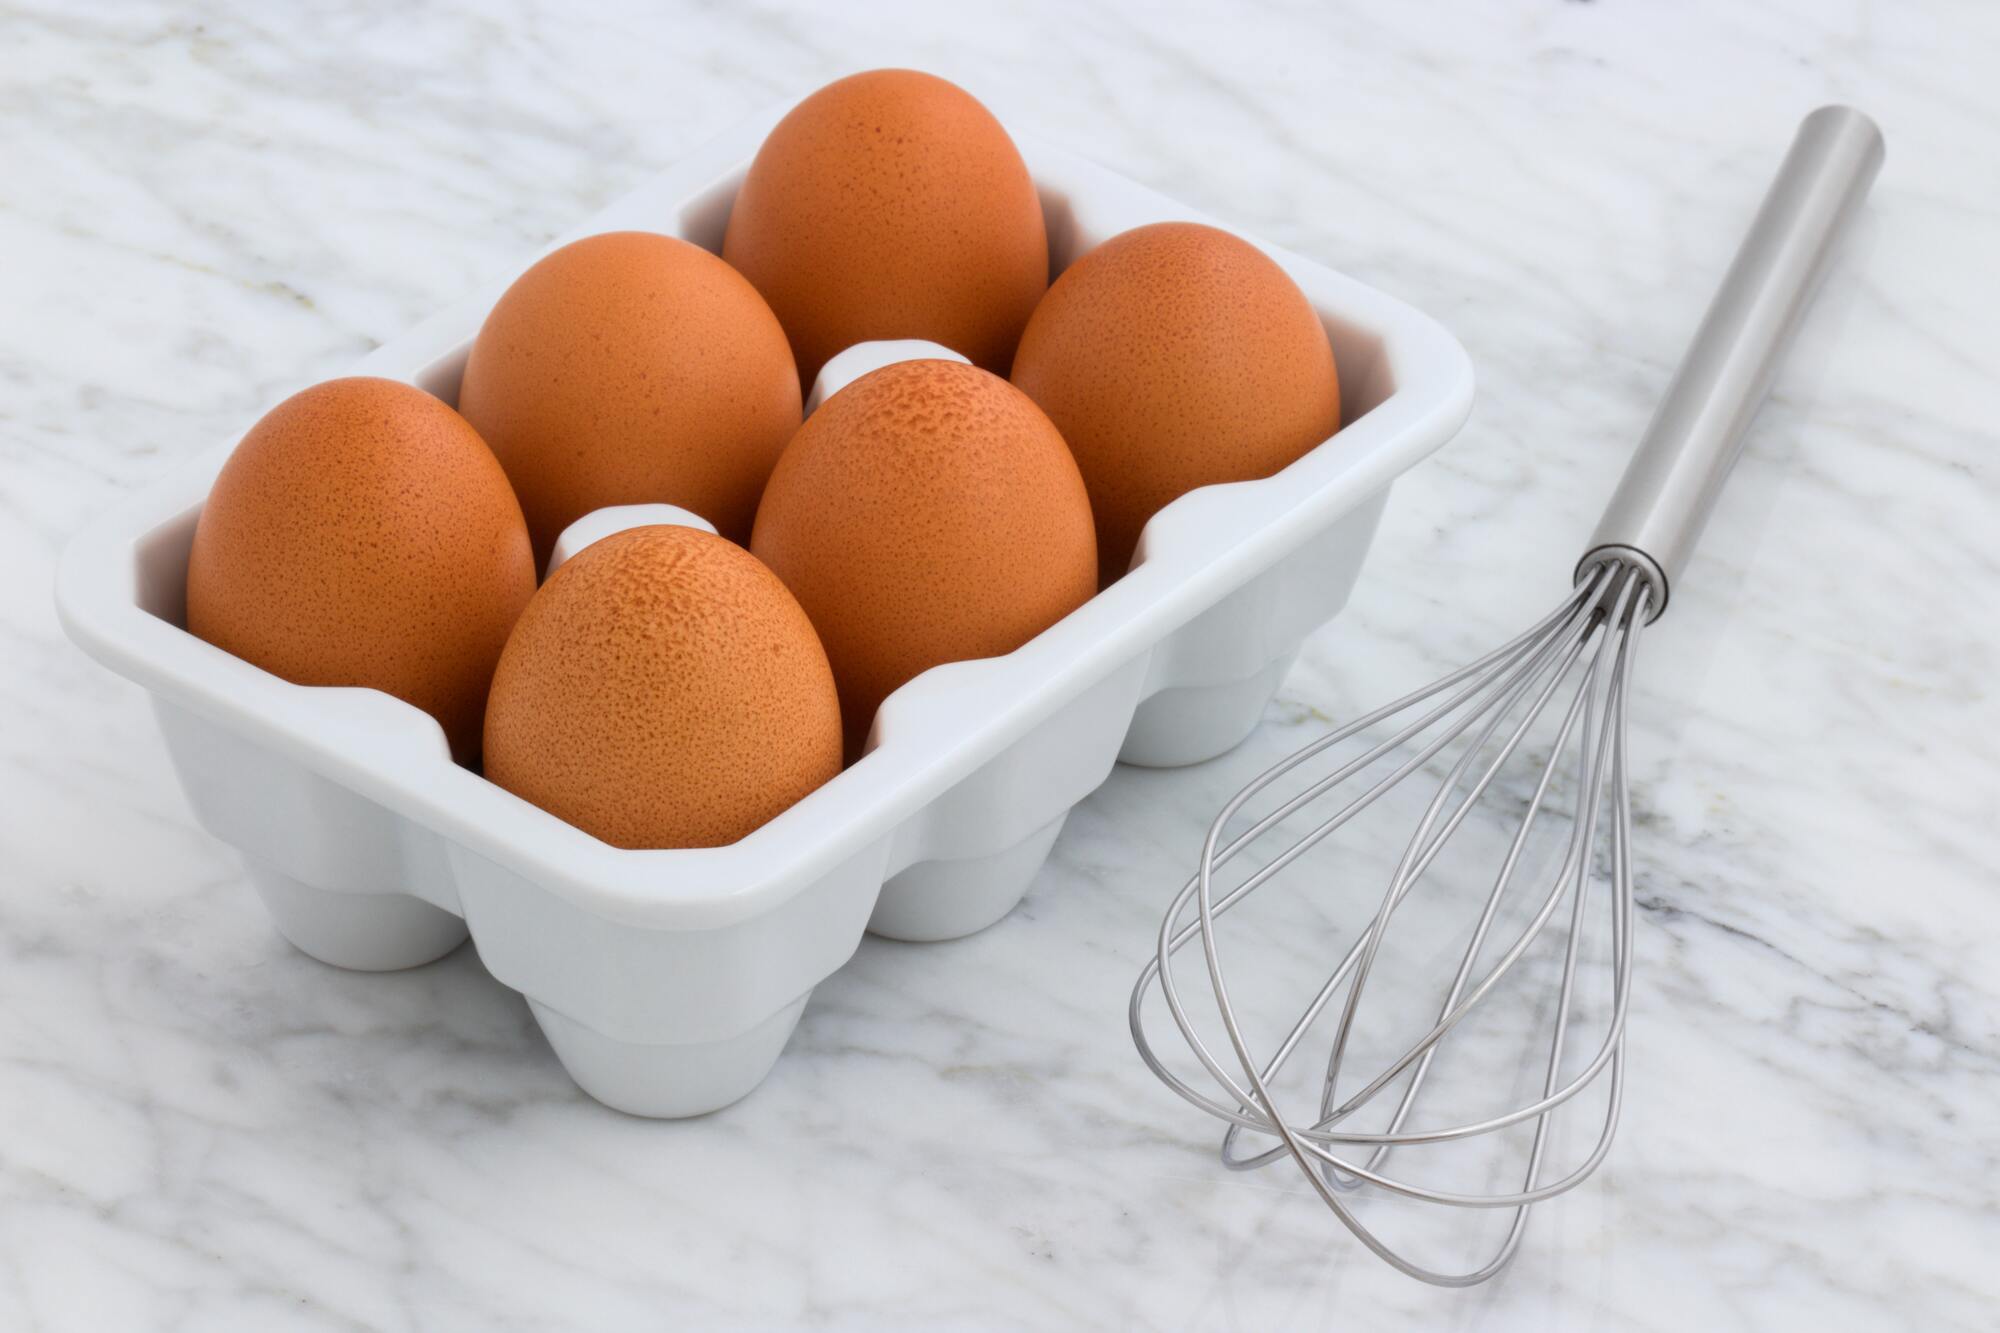 How to store chicken eggs properly